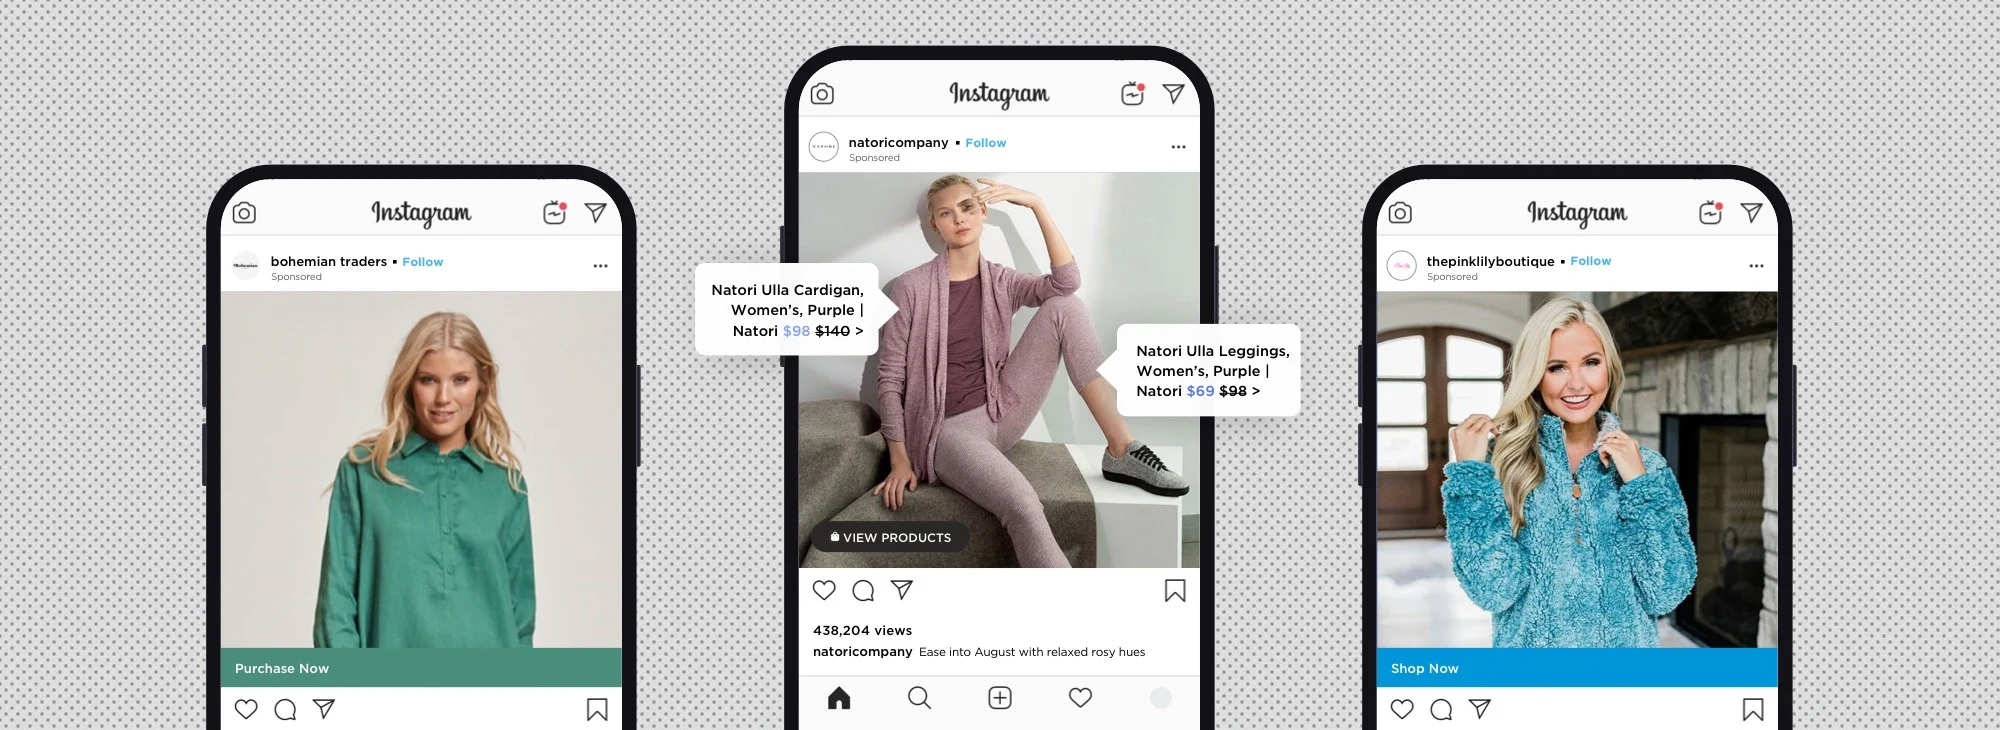 https://cms-wp.bigcommerce.com/wp-content/uploads/2019/11/2019-August-Content-Blog-Headers_Batch-2-2-How-To-Advertise-On-Instagram-34CD-MT-@1x.jpg